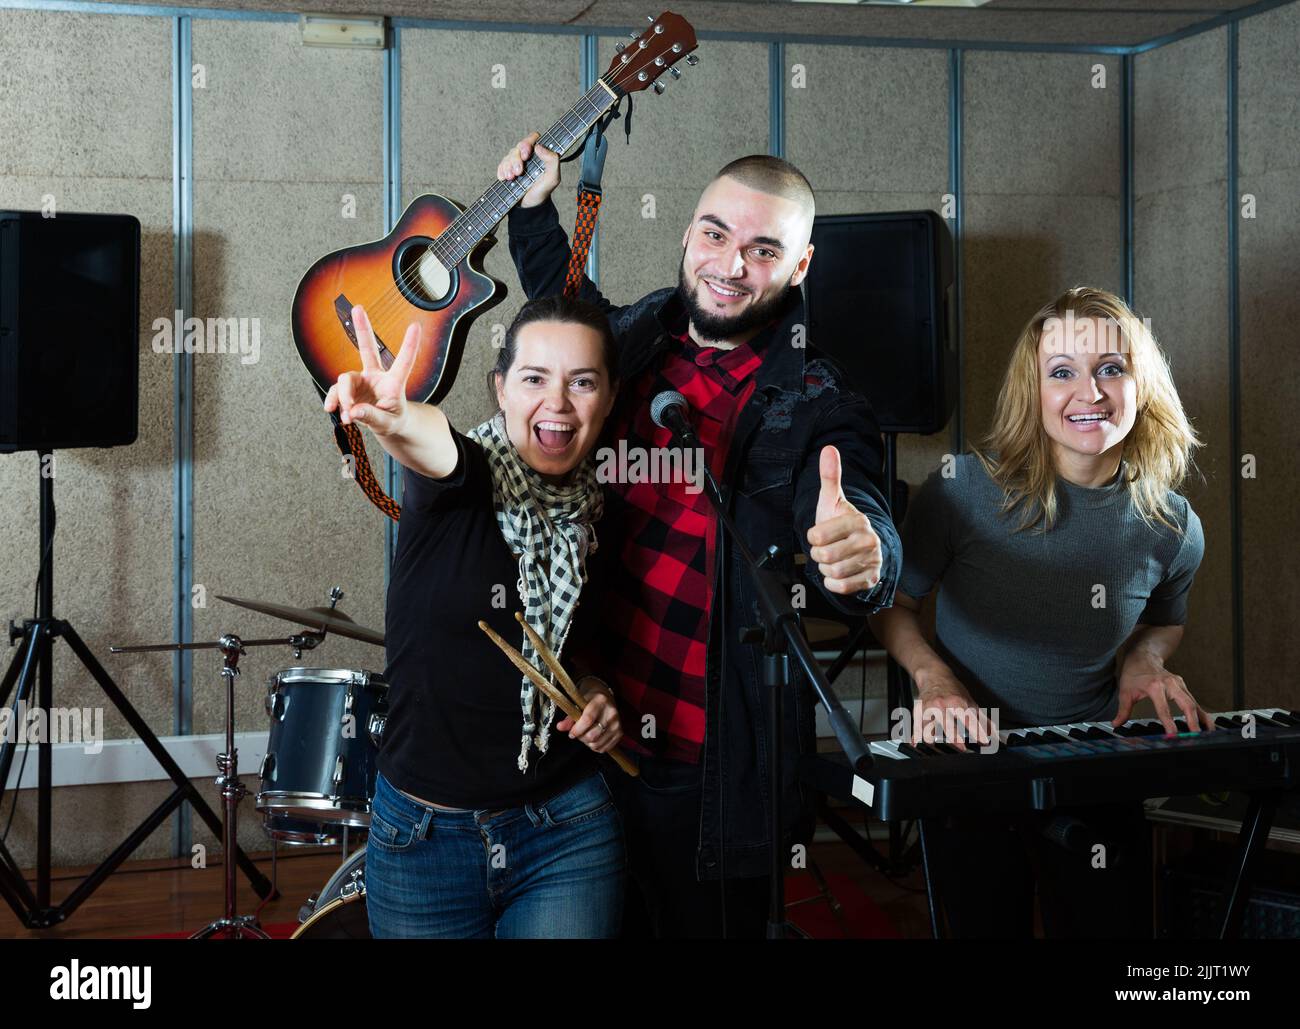 expressive group of rock musicians posing with instruments Stock Photo